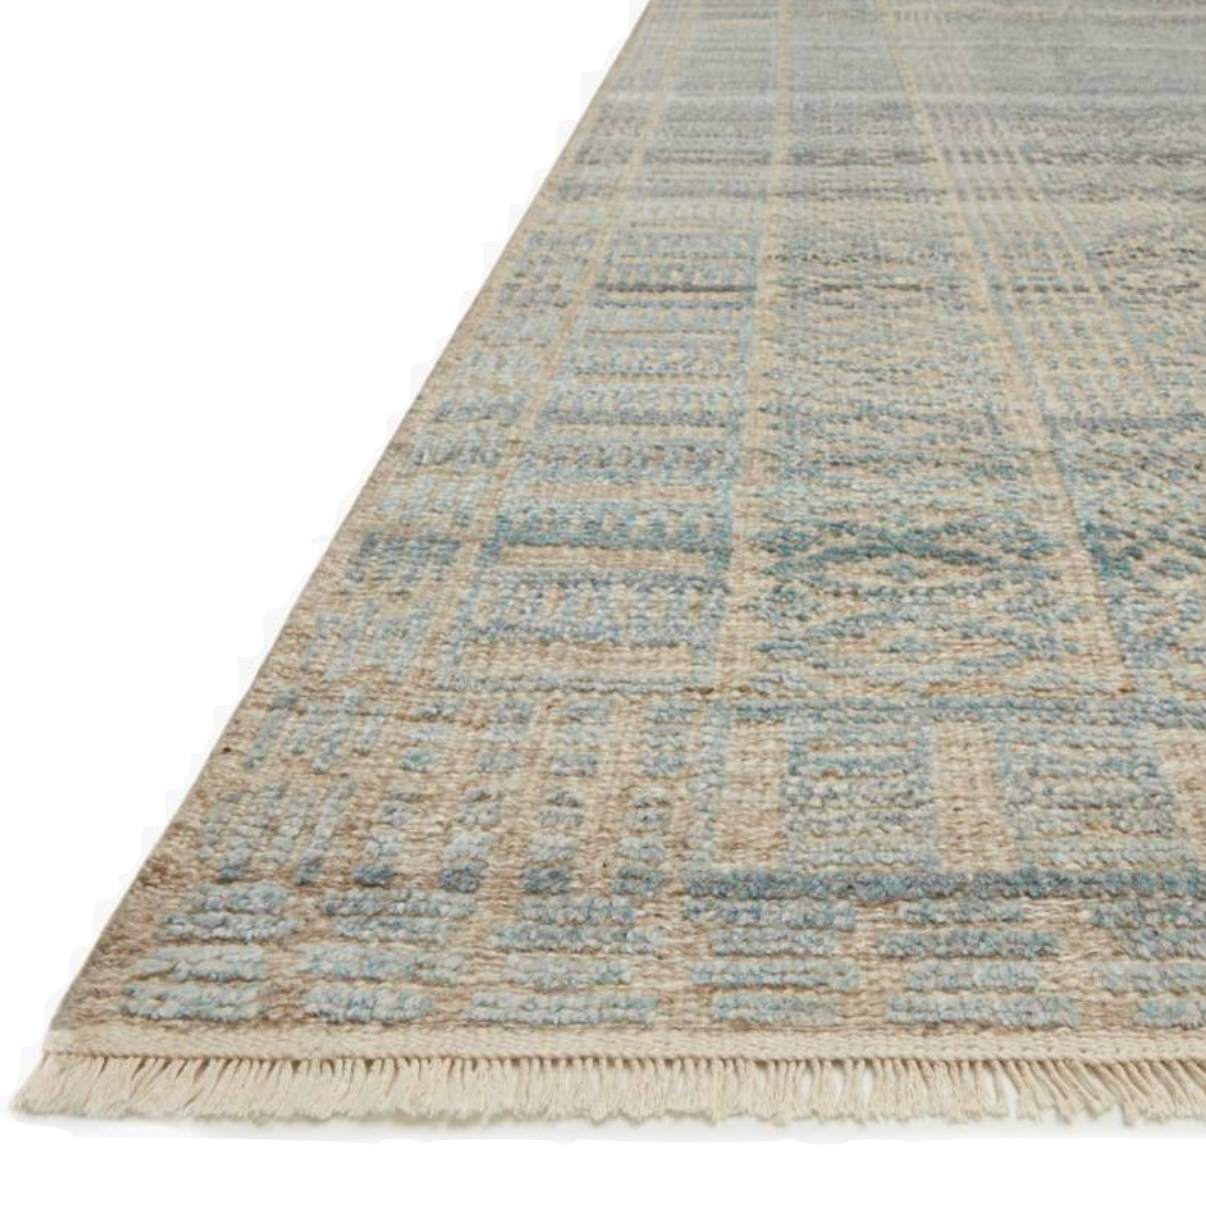 Timeless yet modern, the Nola Taupe / Ocean Area Rug is hand-knotted in India of viscose, cotton, wool and other fibers. The tonal collection showcases an elevated texture, accentuating the pattern in every piece.  Hand Knotted 66% Viscose | 25% Wool | 7% Cotton | 2% Other Fiber Pile NOL-03 Taupe / Ocean